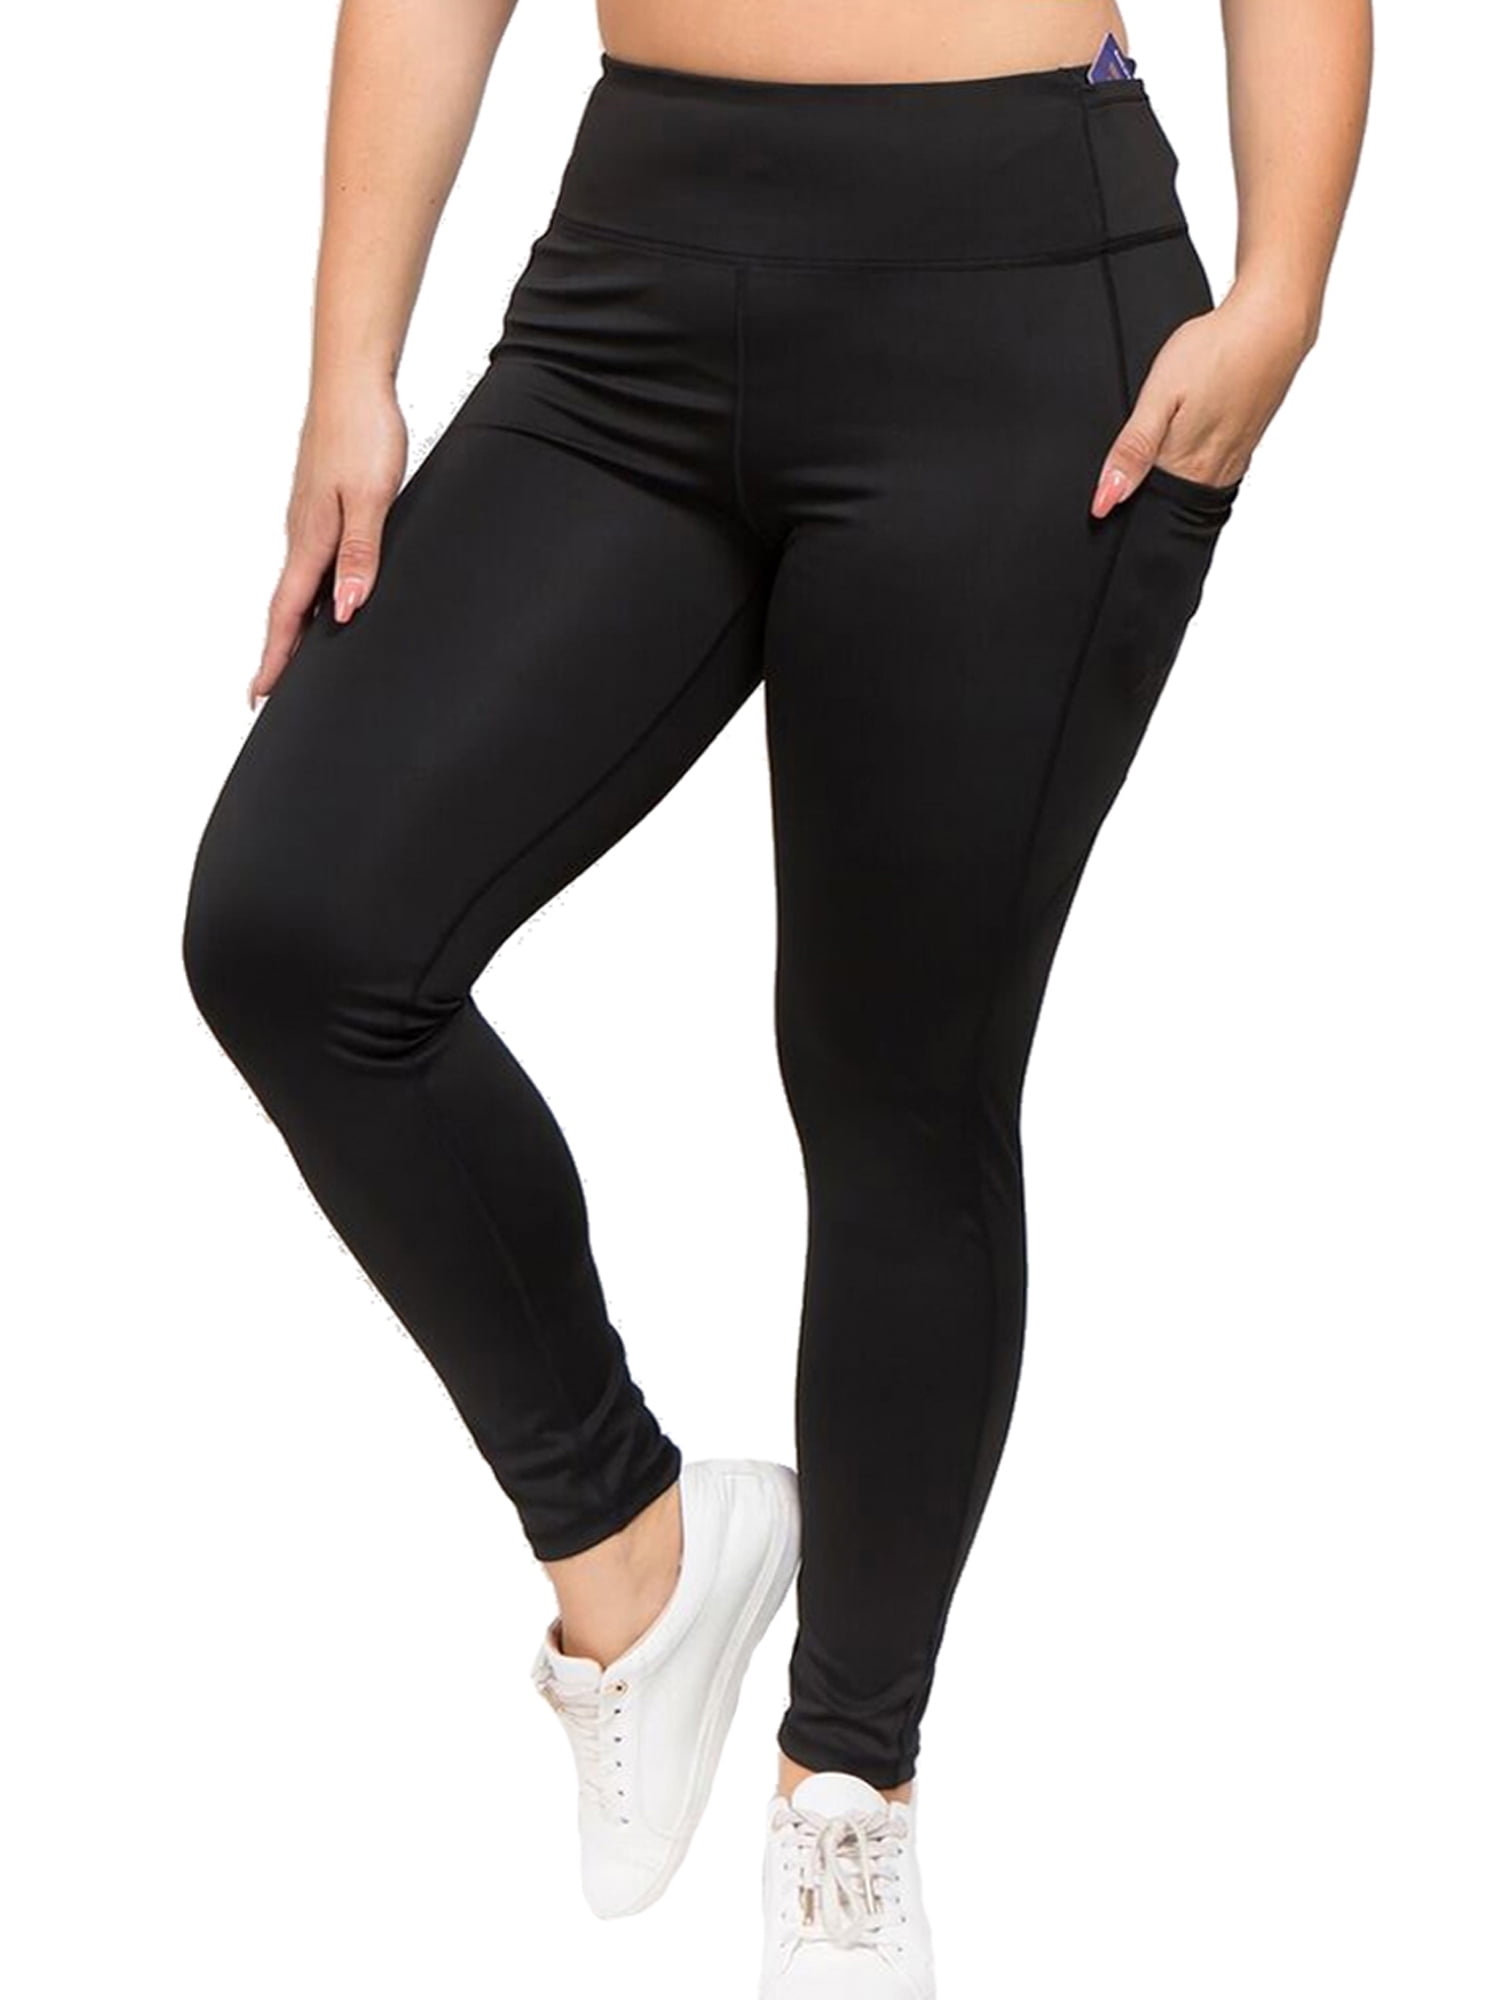 Black Plus Size High Waist Activewear Leggings With Pockets Size X-Large